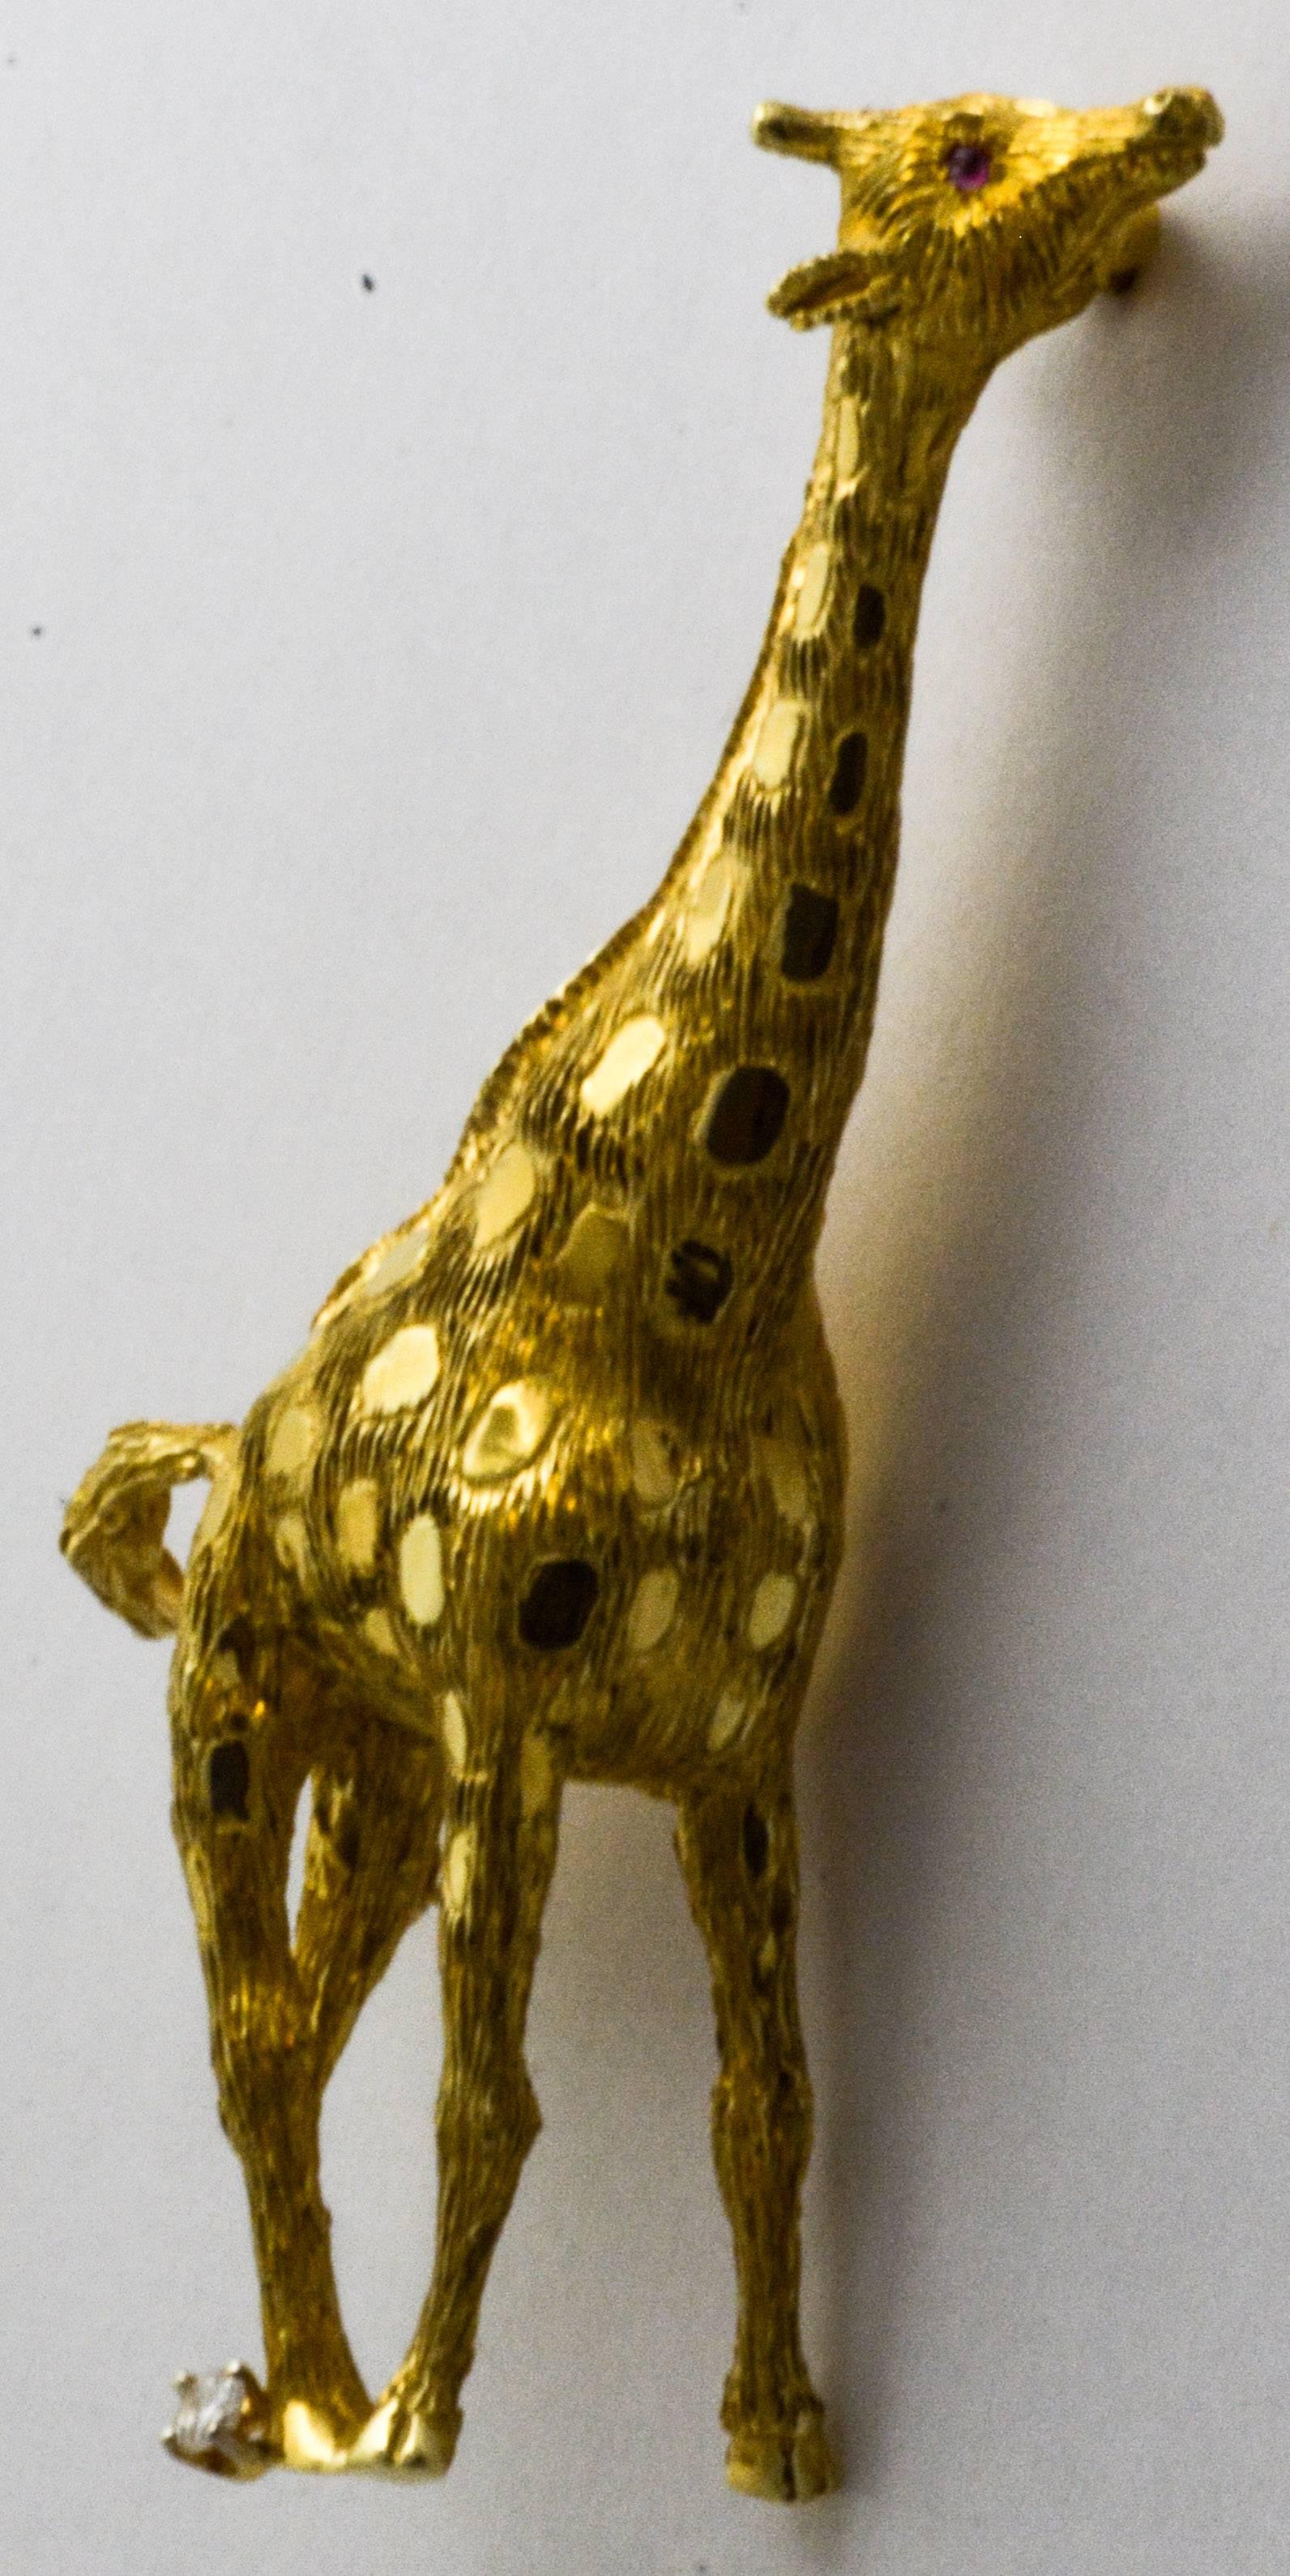 This brooch is a stunning Pampillonia design fashioned in beautiful 18 karat yellow gold in the shape of a giraffe. The surface is hand engraved to capture the texture of hair. Measuring 65.5 mm tall and 27 mm wide, the pin is set with a pair of